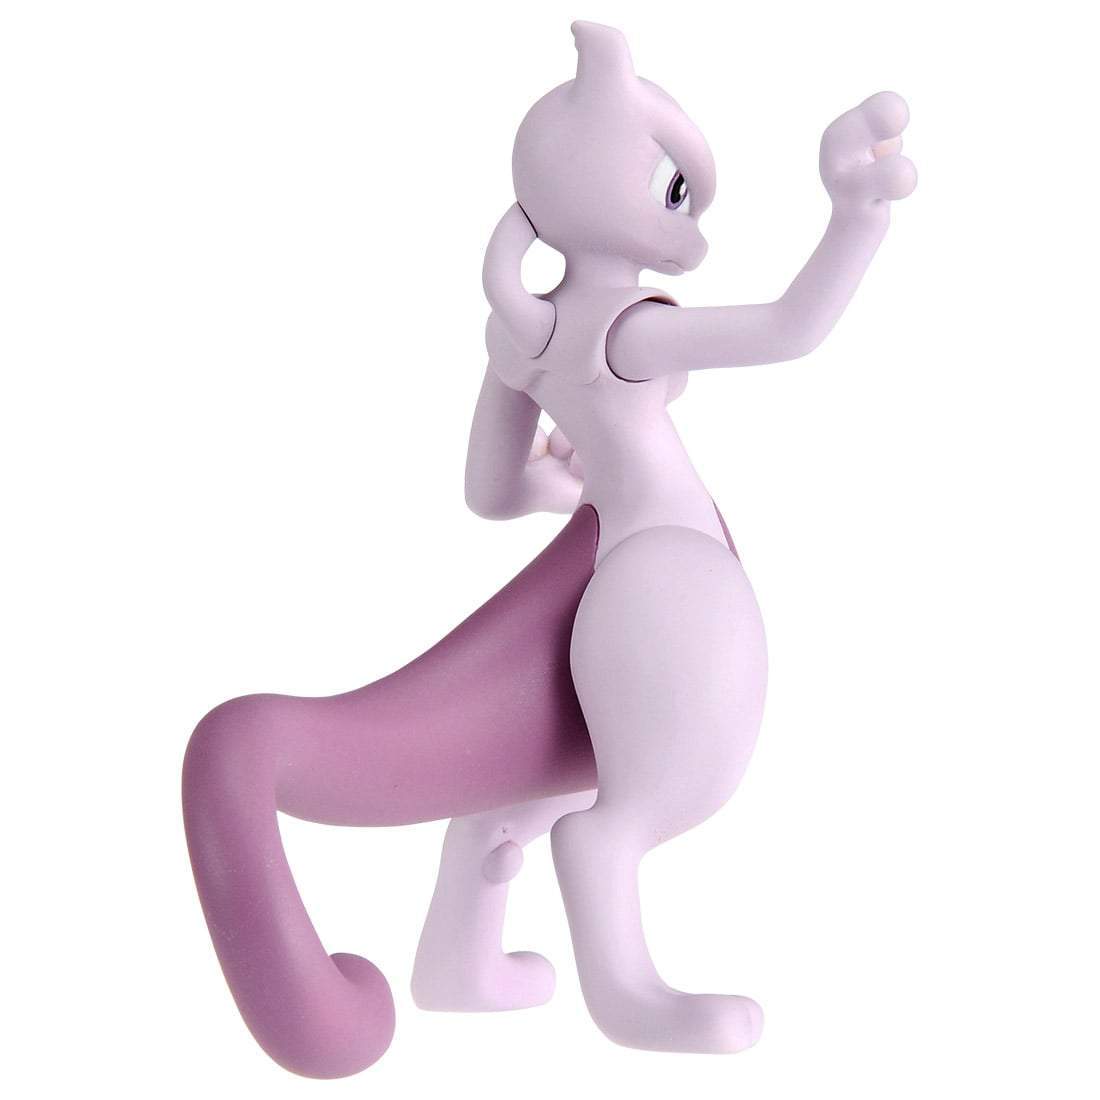 Pokemon Moncolle &quot;Mewtwo&quot; (ML20)-Takara Tomy-Ace Cards &amp; Collectibles